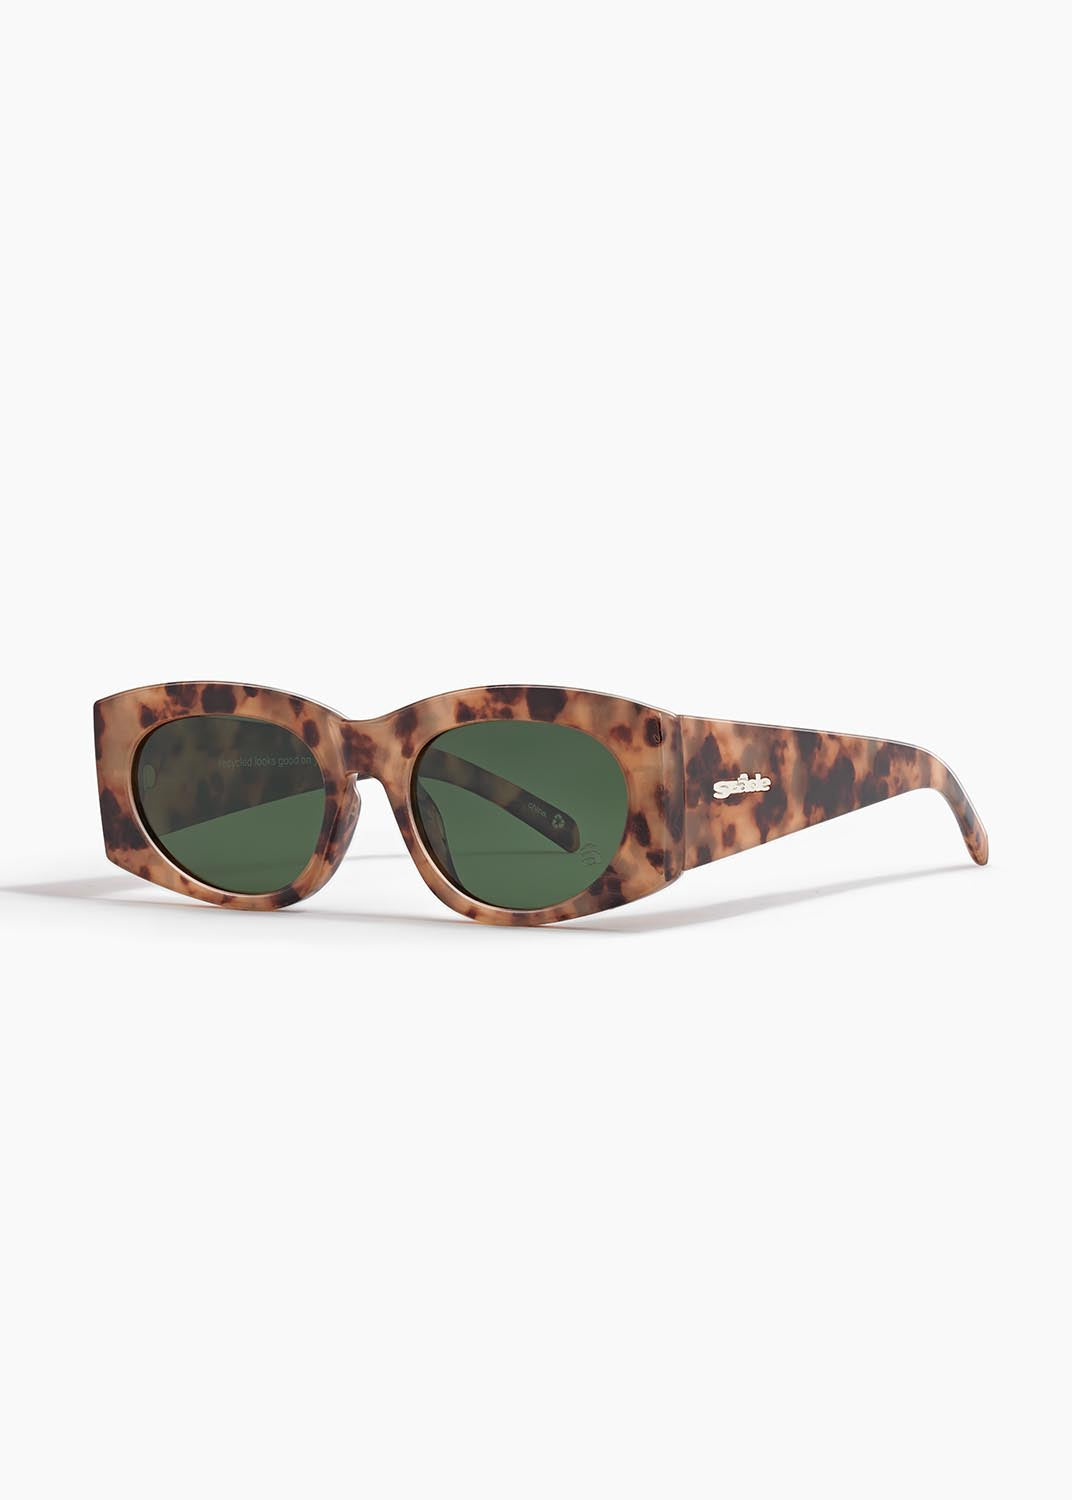 Szade RECYCLED SUNGLASSES Cave ; Coquina / Moss Polarised in Coquina / Moss Polarised